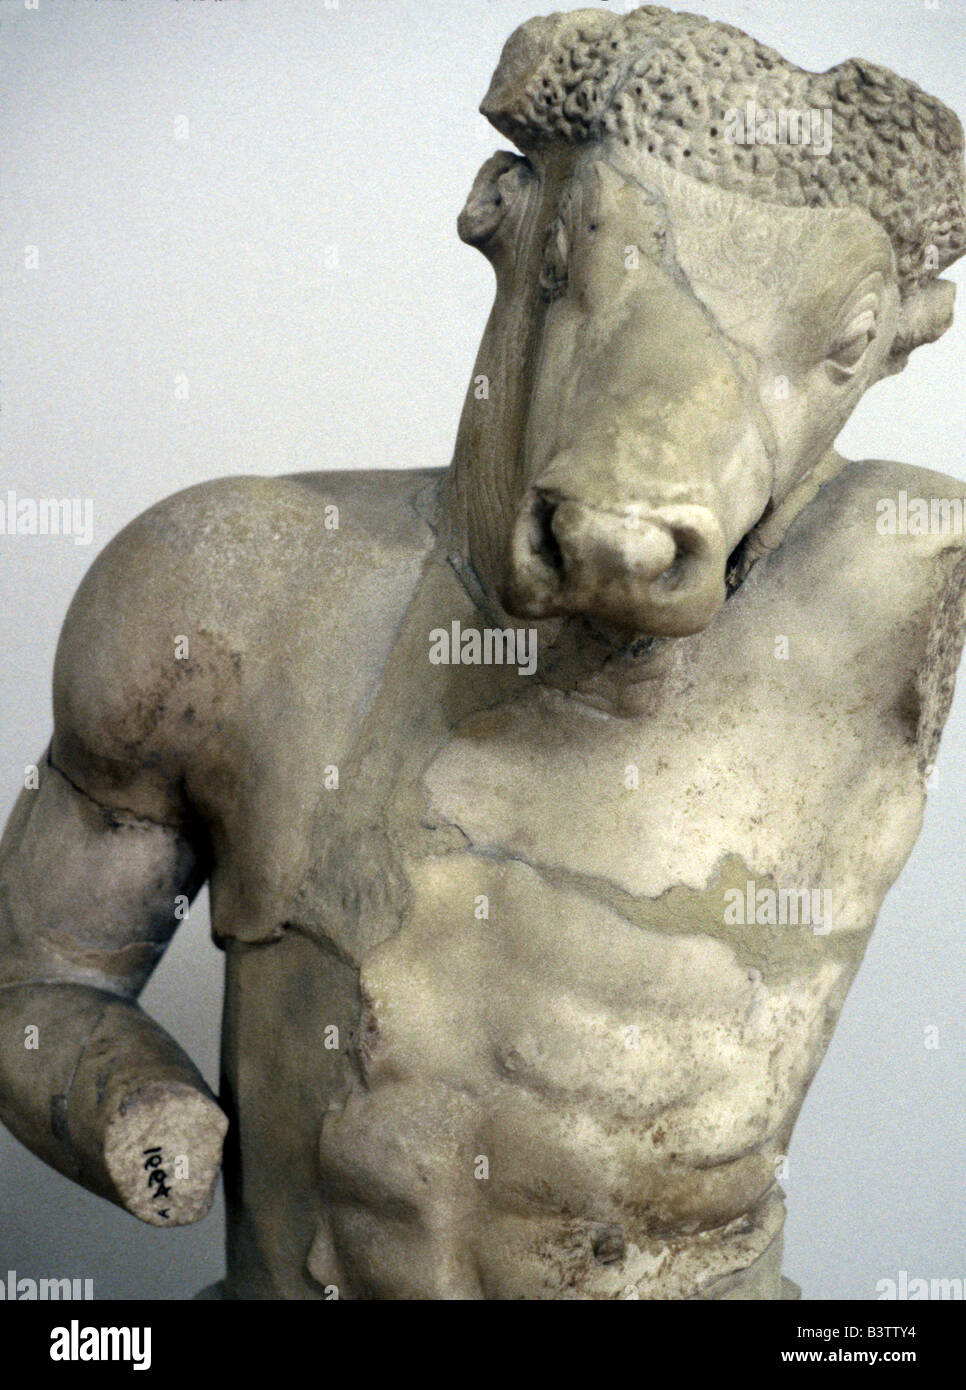 Europe, Greece, Athens. Classical era marble statue of a Minotaur in the National Archeological Museum. Stock Photo